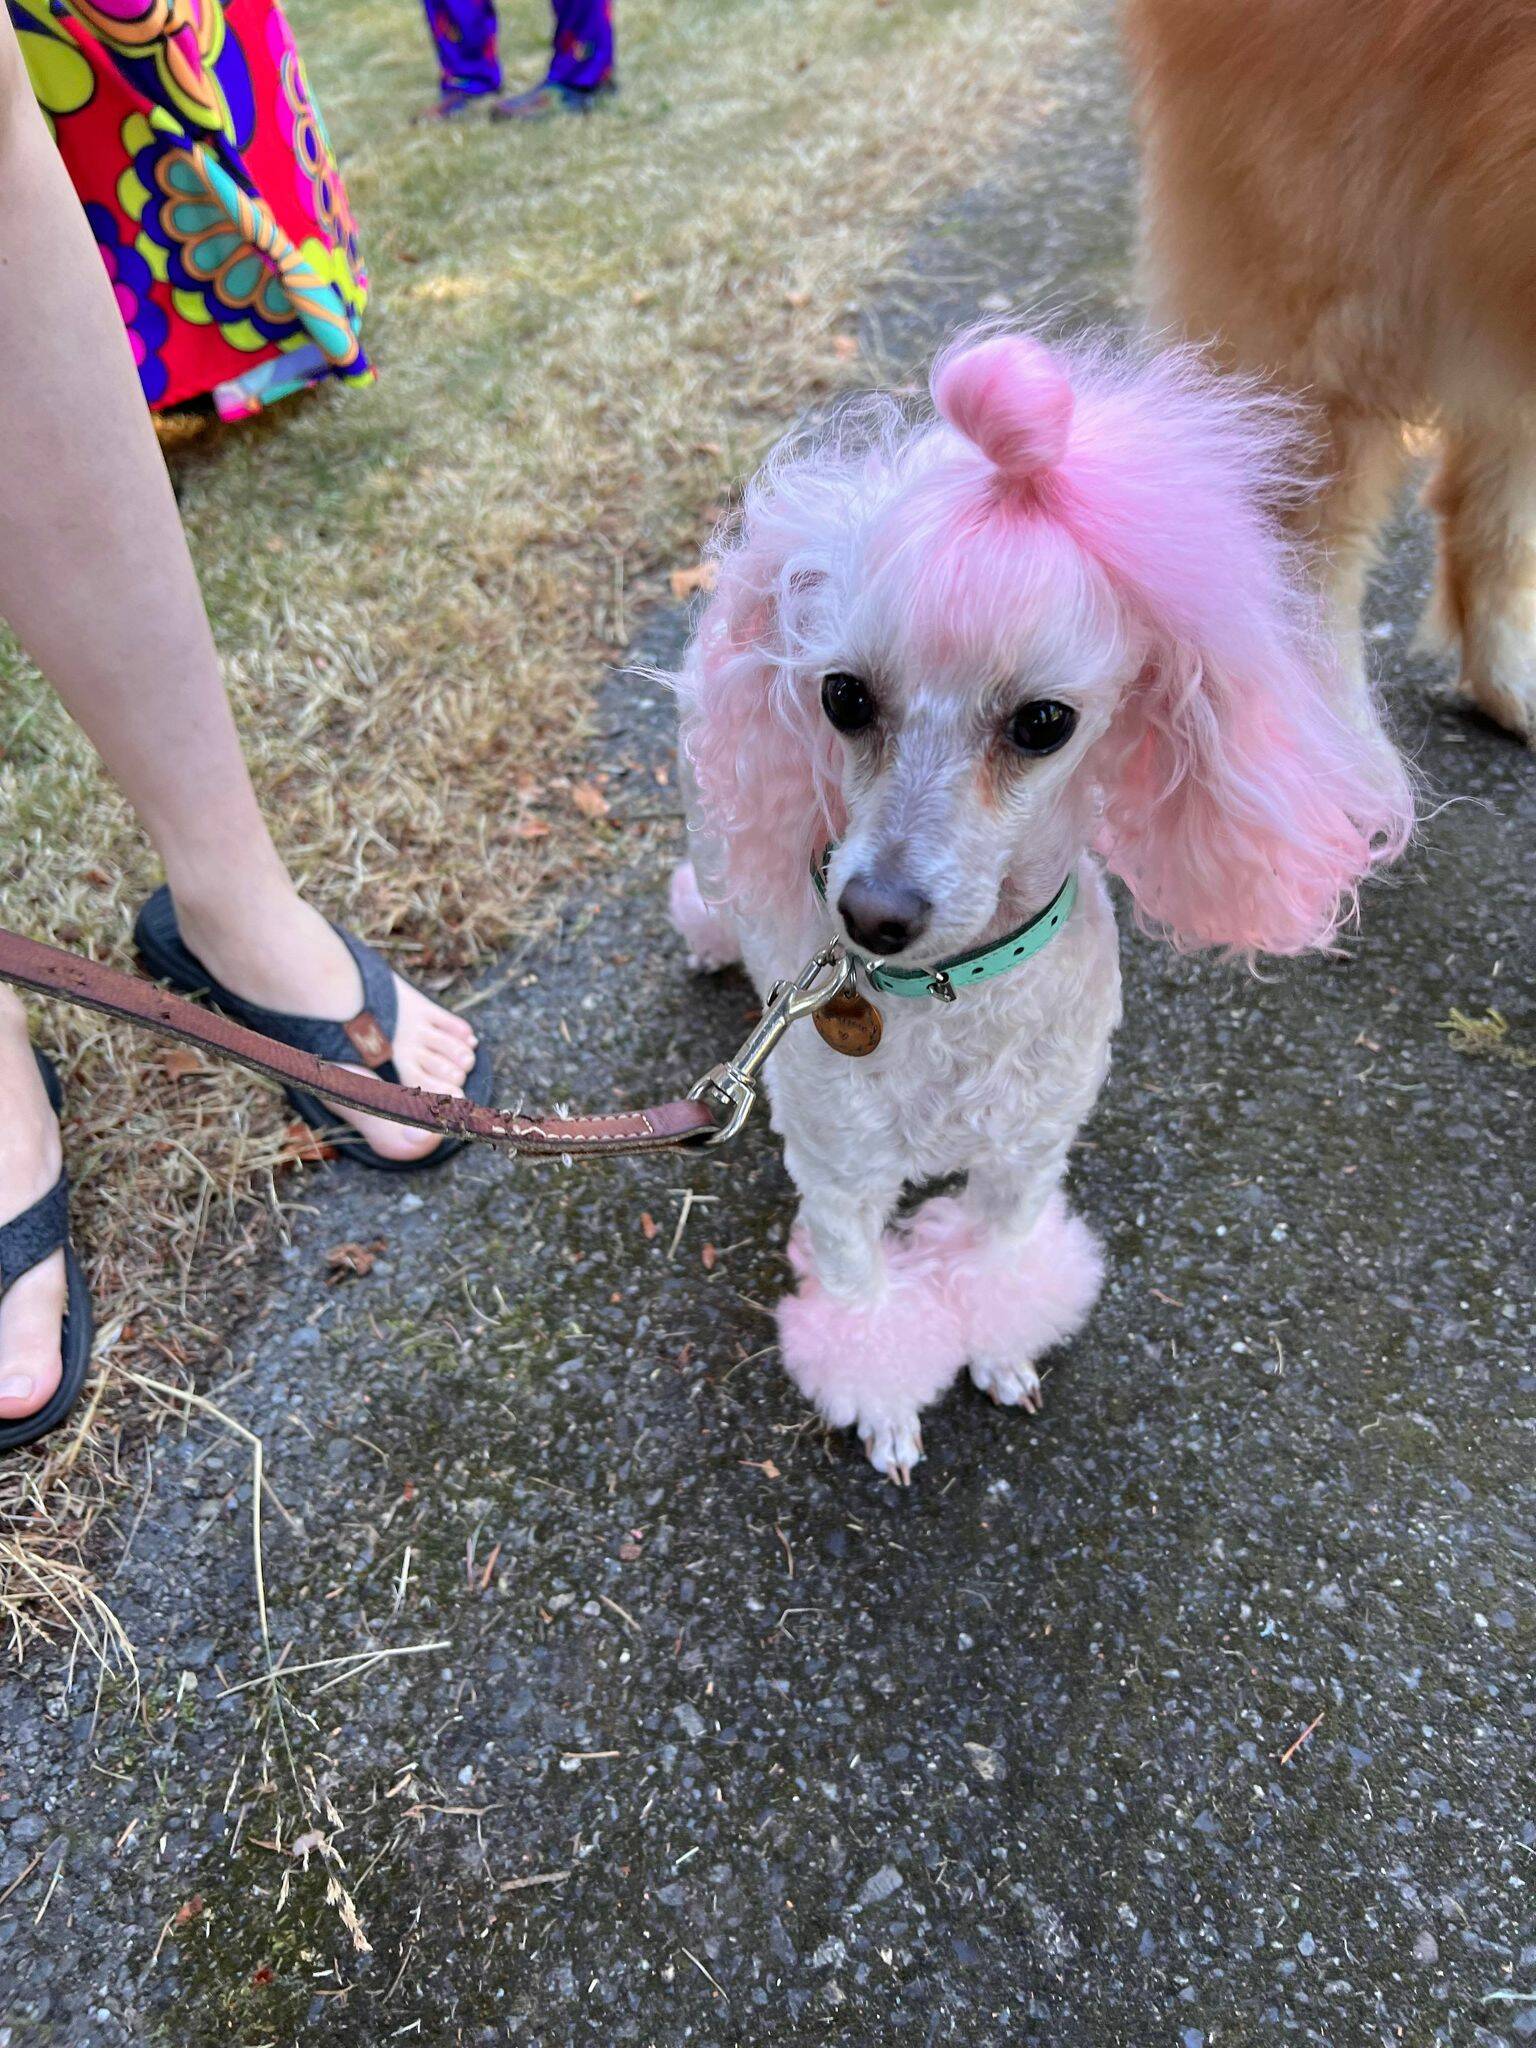 Furry friend at Wayside UCC Pride Picnic August 6. Picture courtesy of Allison Fine.